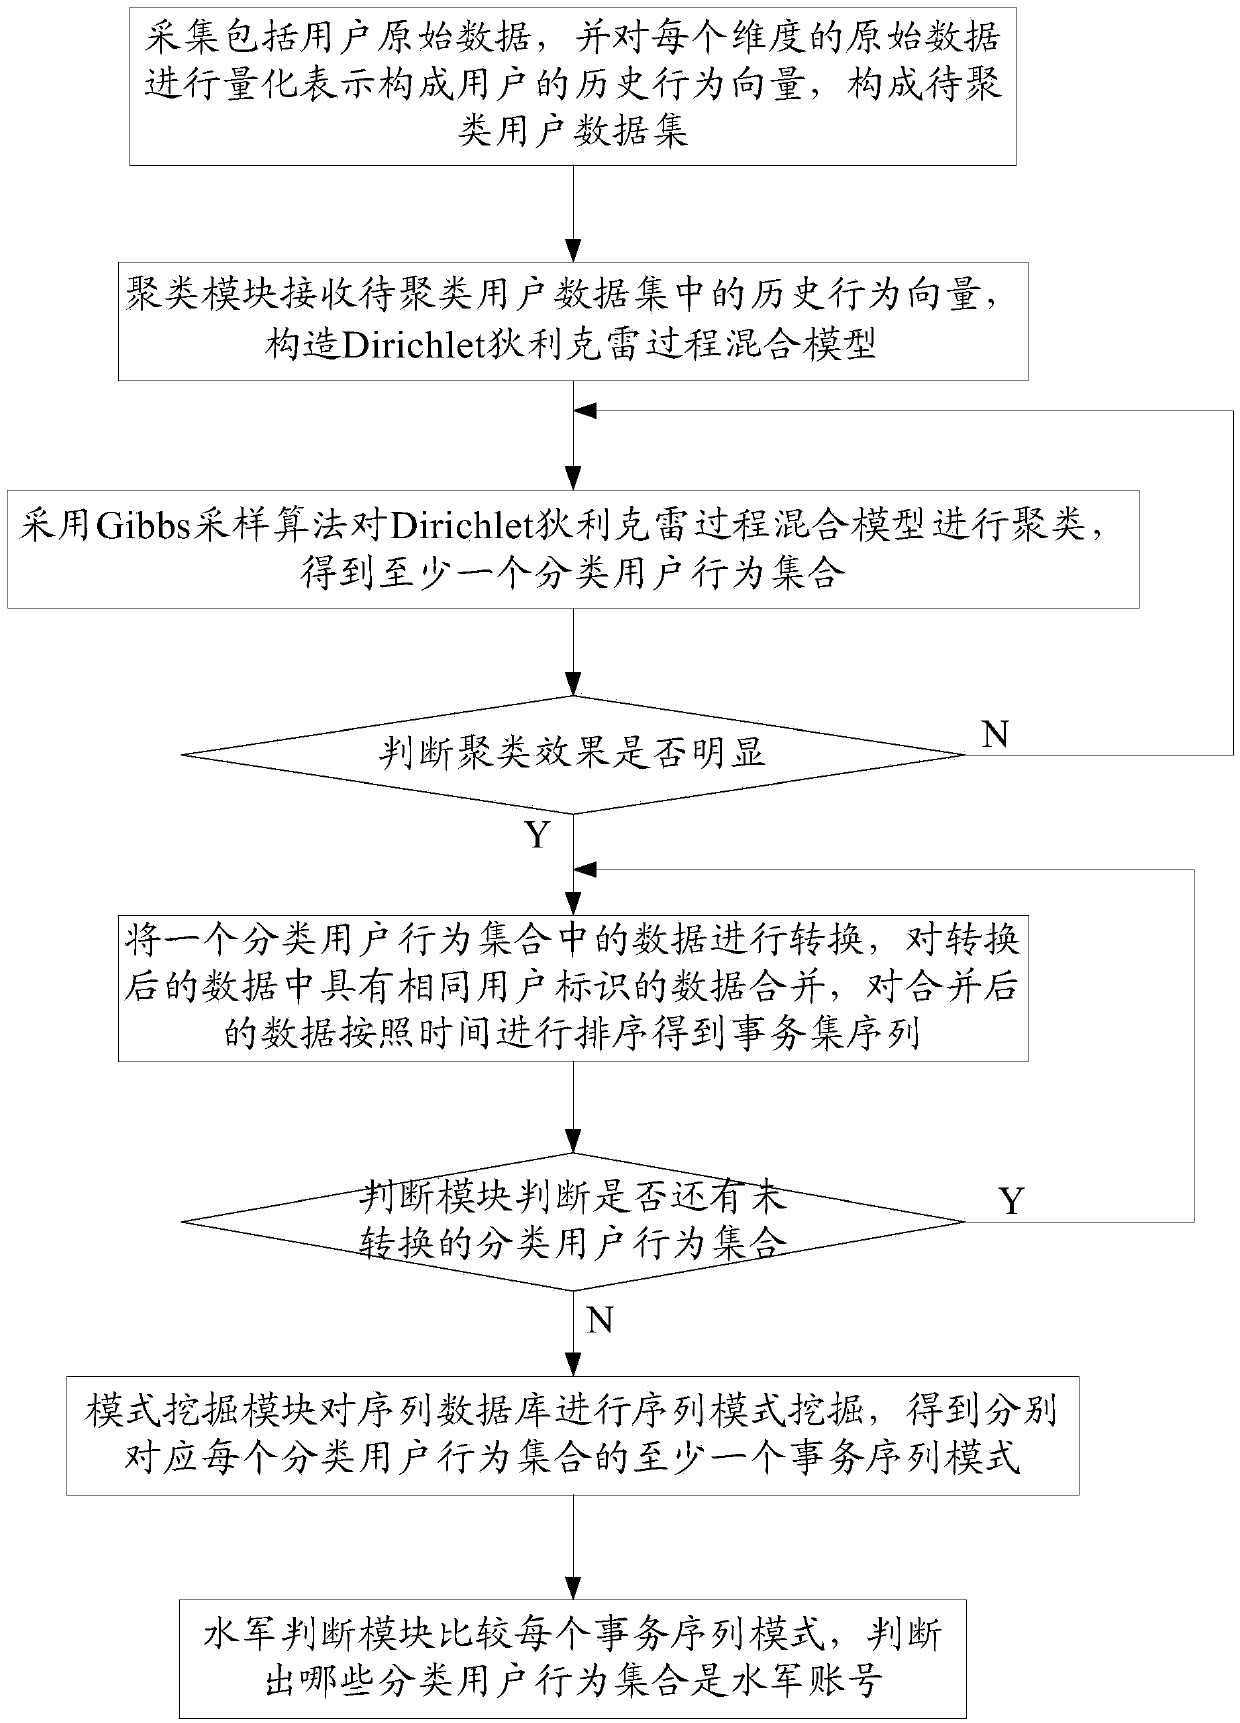 Network water army behavior detection method and system based on mixed Dirichlet process